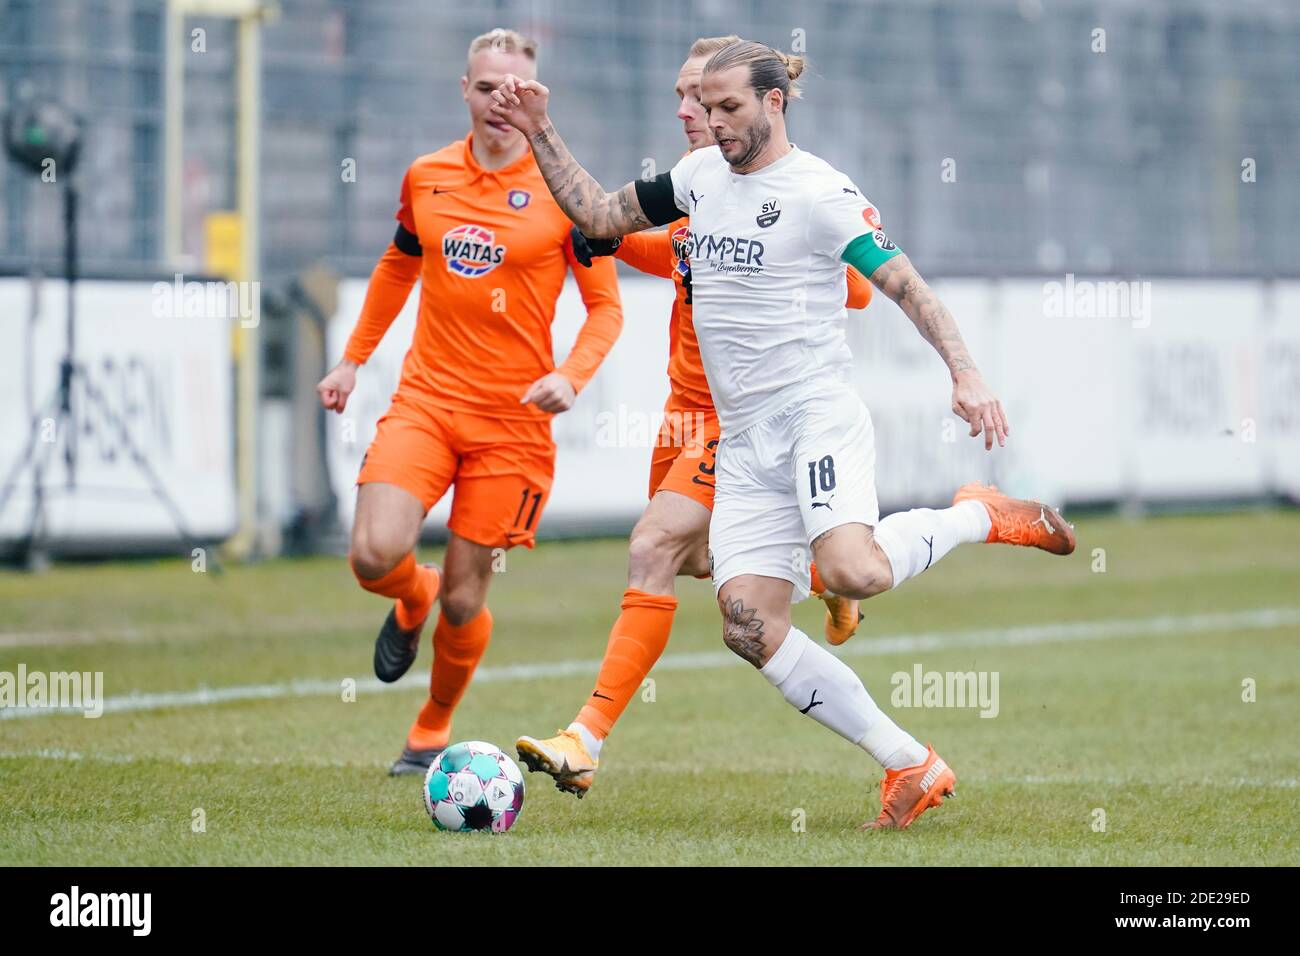 Sandhausen, Germany. 28th Nov, 2020. Football: 2nd Bundesliga, SV Sandhausen - FC Erzgebirge Aue, 9th matchday, Hardtwaldstadion. Ben Zolinski (l) from Erzgebirge Aue and Sandhausen's Dennis Diekmeier fight for the ball. Credit: Uwe Anspach/dpa - IMPORTANT NOTE: In accordance with the regulations of the DFL Deutsche Fußball Liga and the DFB Deutscher Fußball-Bund, it is prohibited to exploit or have exploited in the stadium and/or from the game taken photographs in the form of sequence images and/or video-like photo series./dpa/Alamy Live News Stock Photo